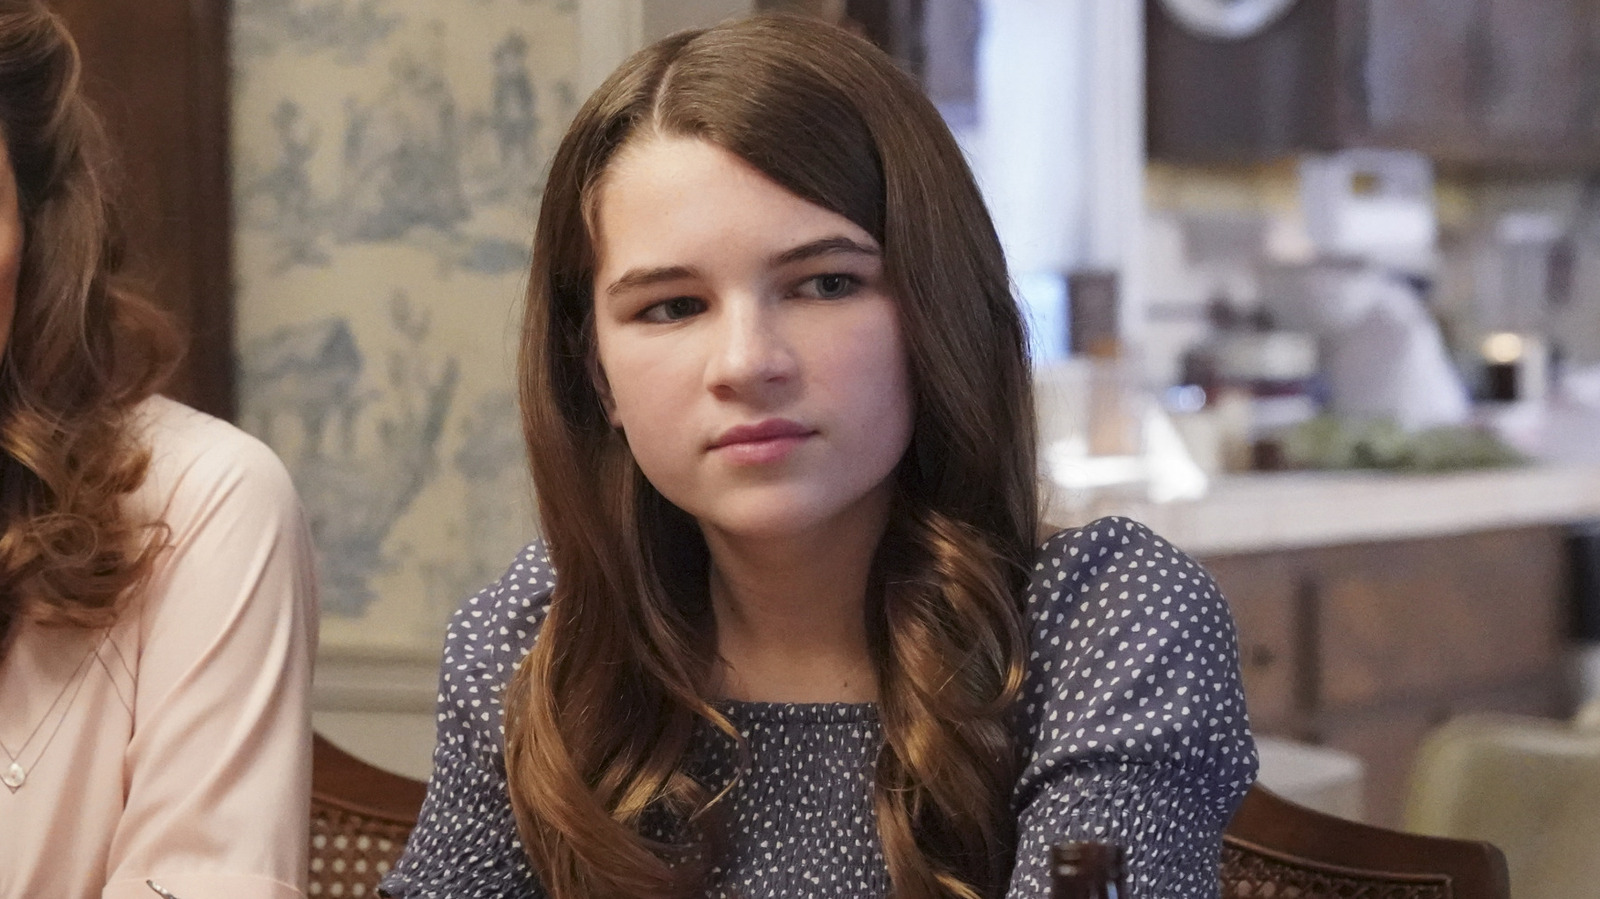 Young Sheldon Star Raegan Revord Dreams Of Landing A Role In The MCU